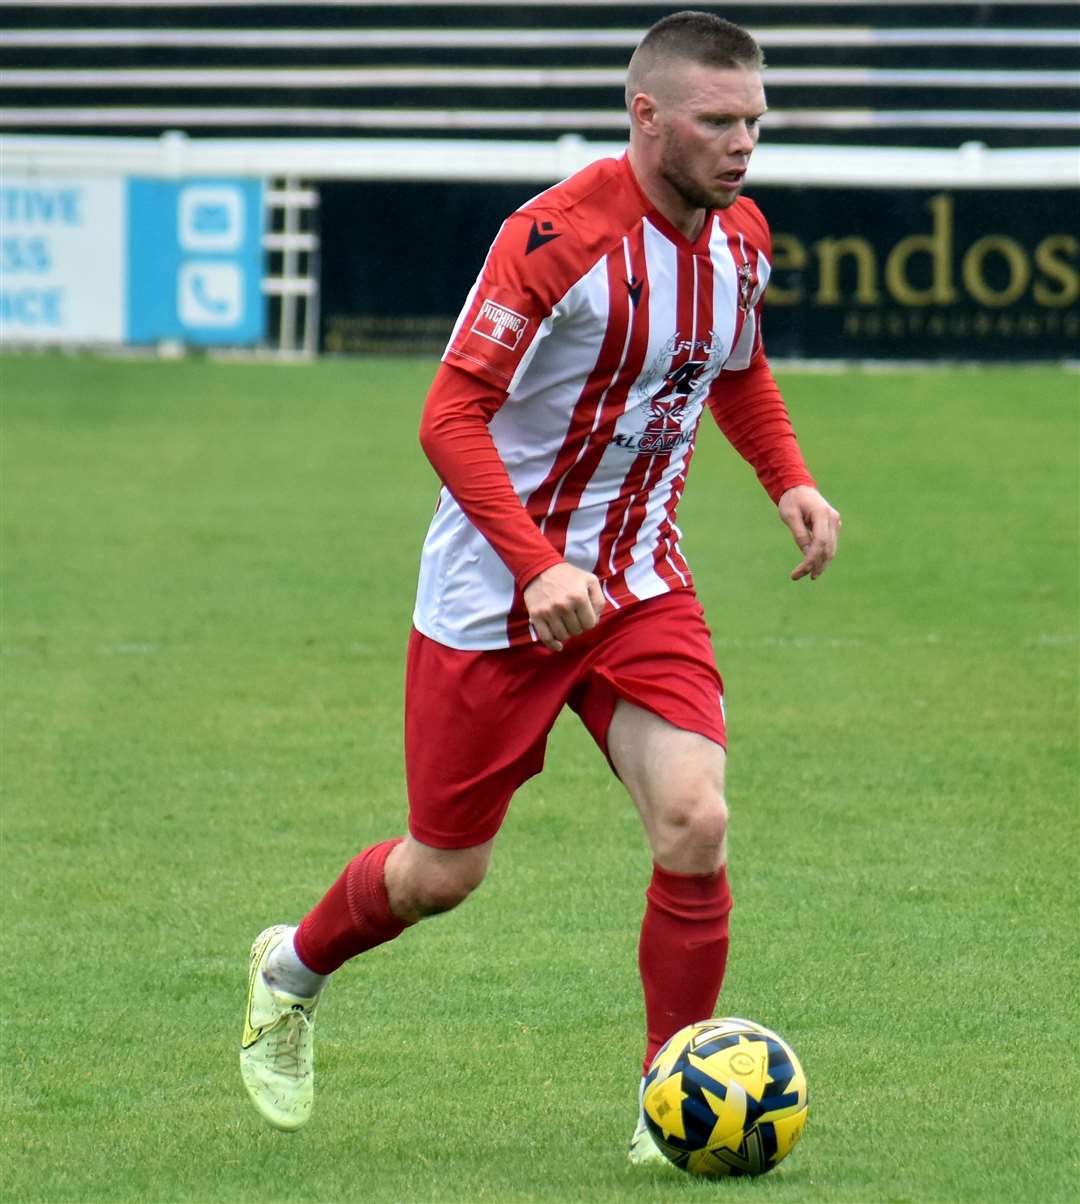 Scott Heard was a key cog in the Invicta midfield on his return from a four-game ban. Picture: Randolph File